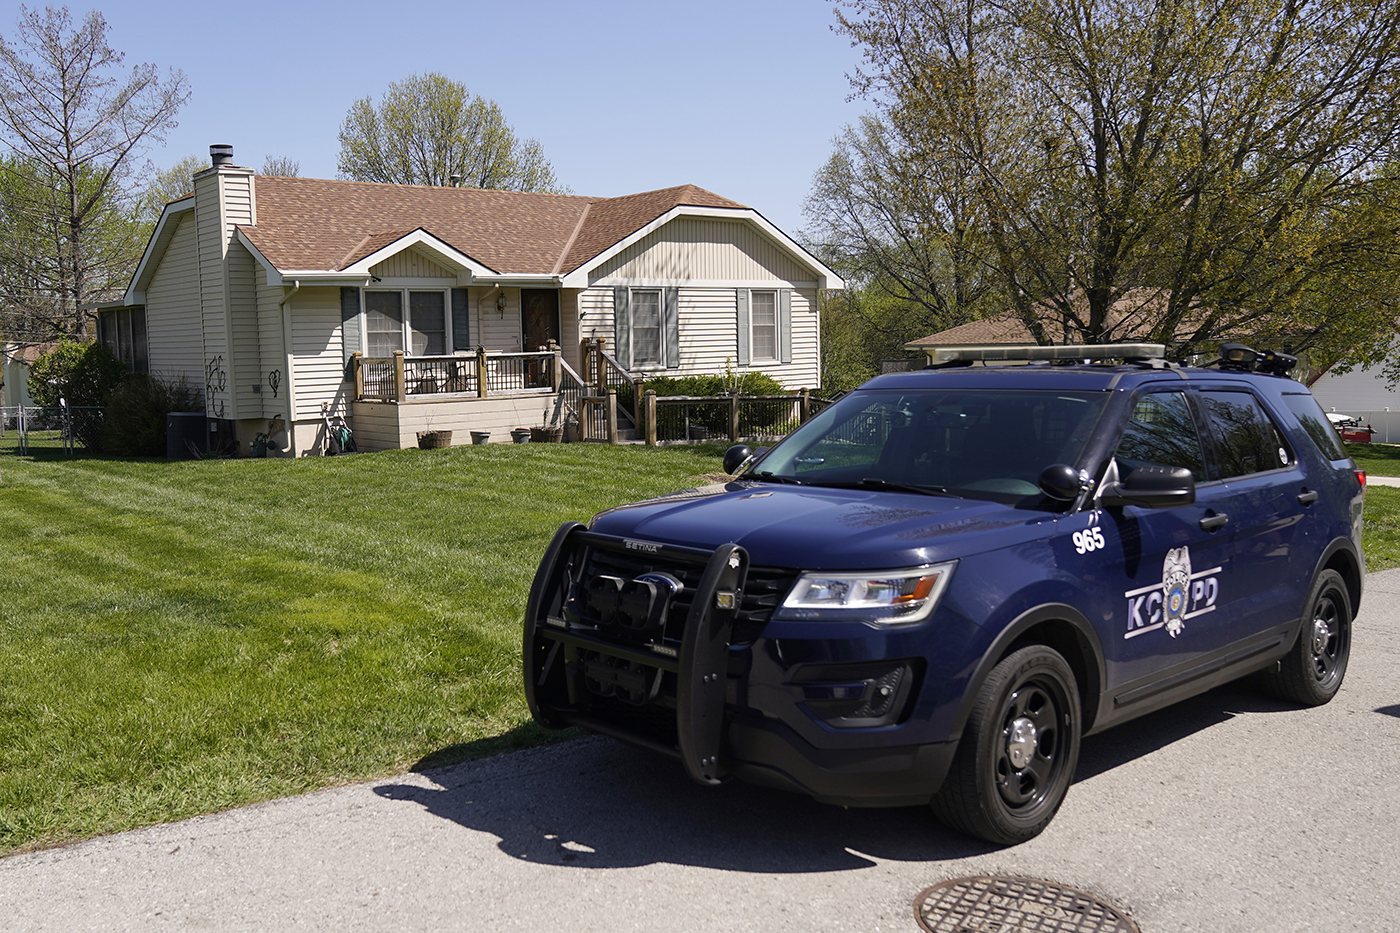 Police car parked outside of a home.